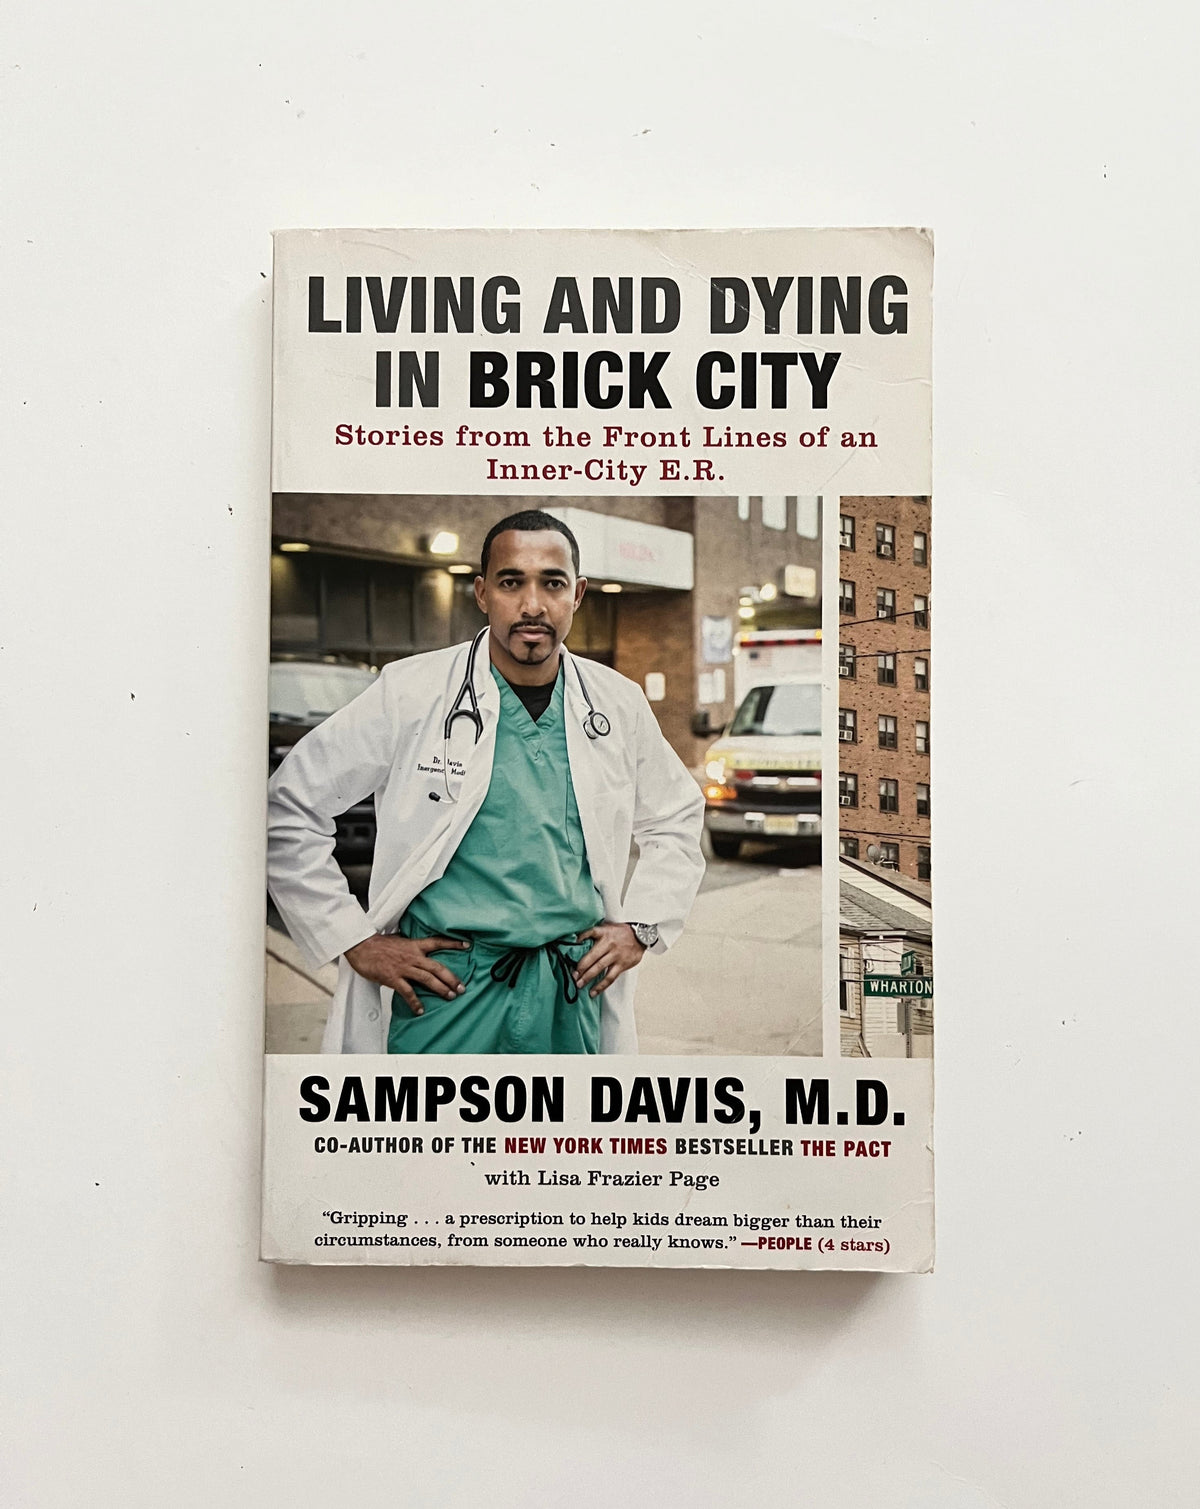 Living and Dying in Brick City: Stories from the Front Lines of an Inner-City E.R. by Sampson Davis